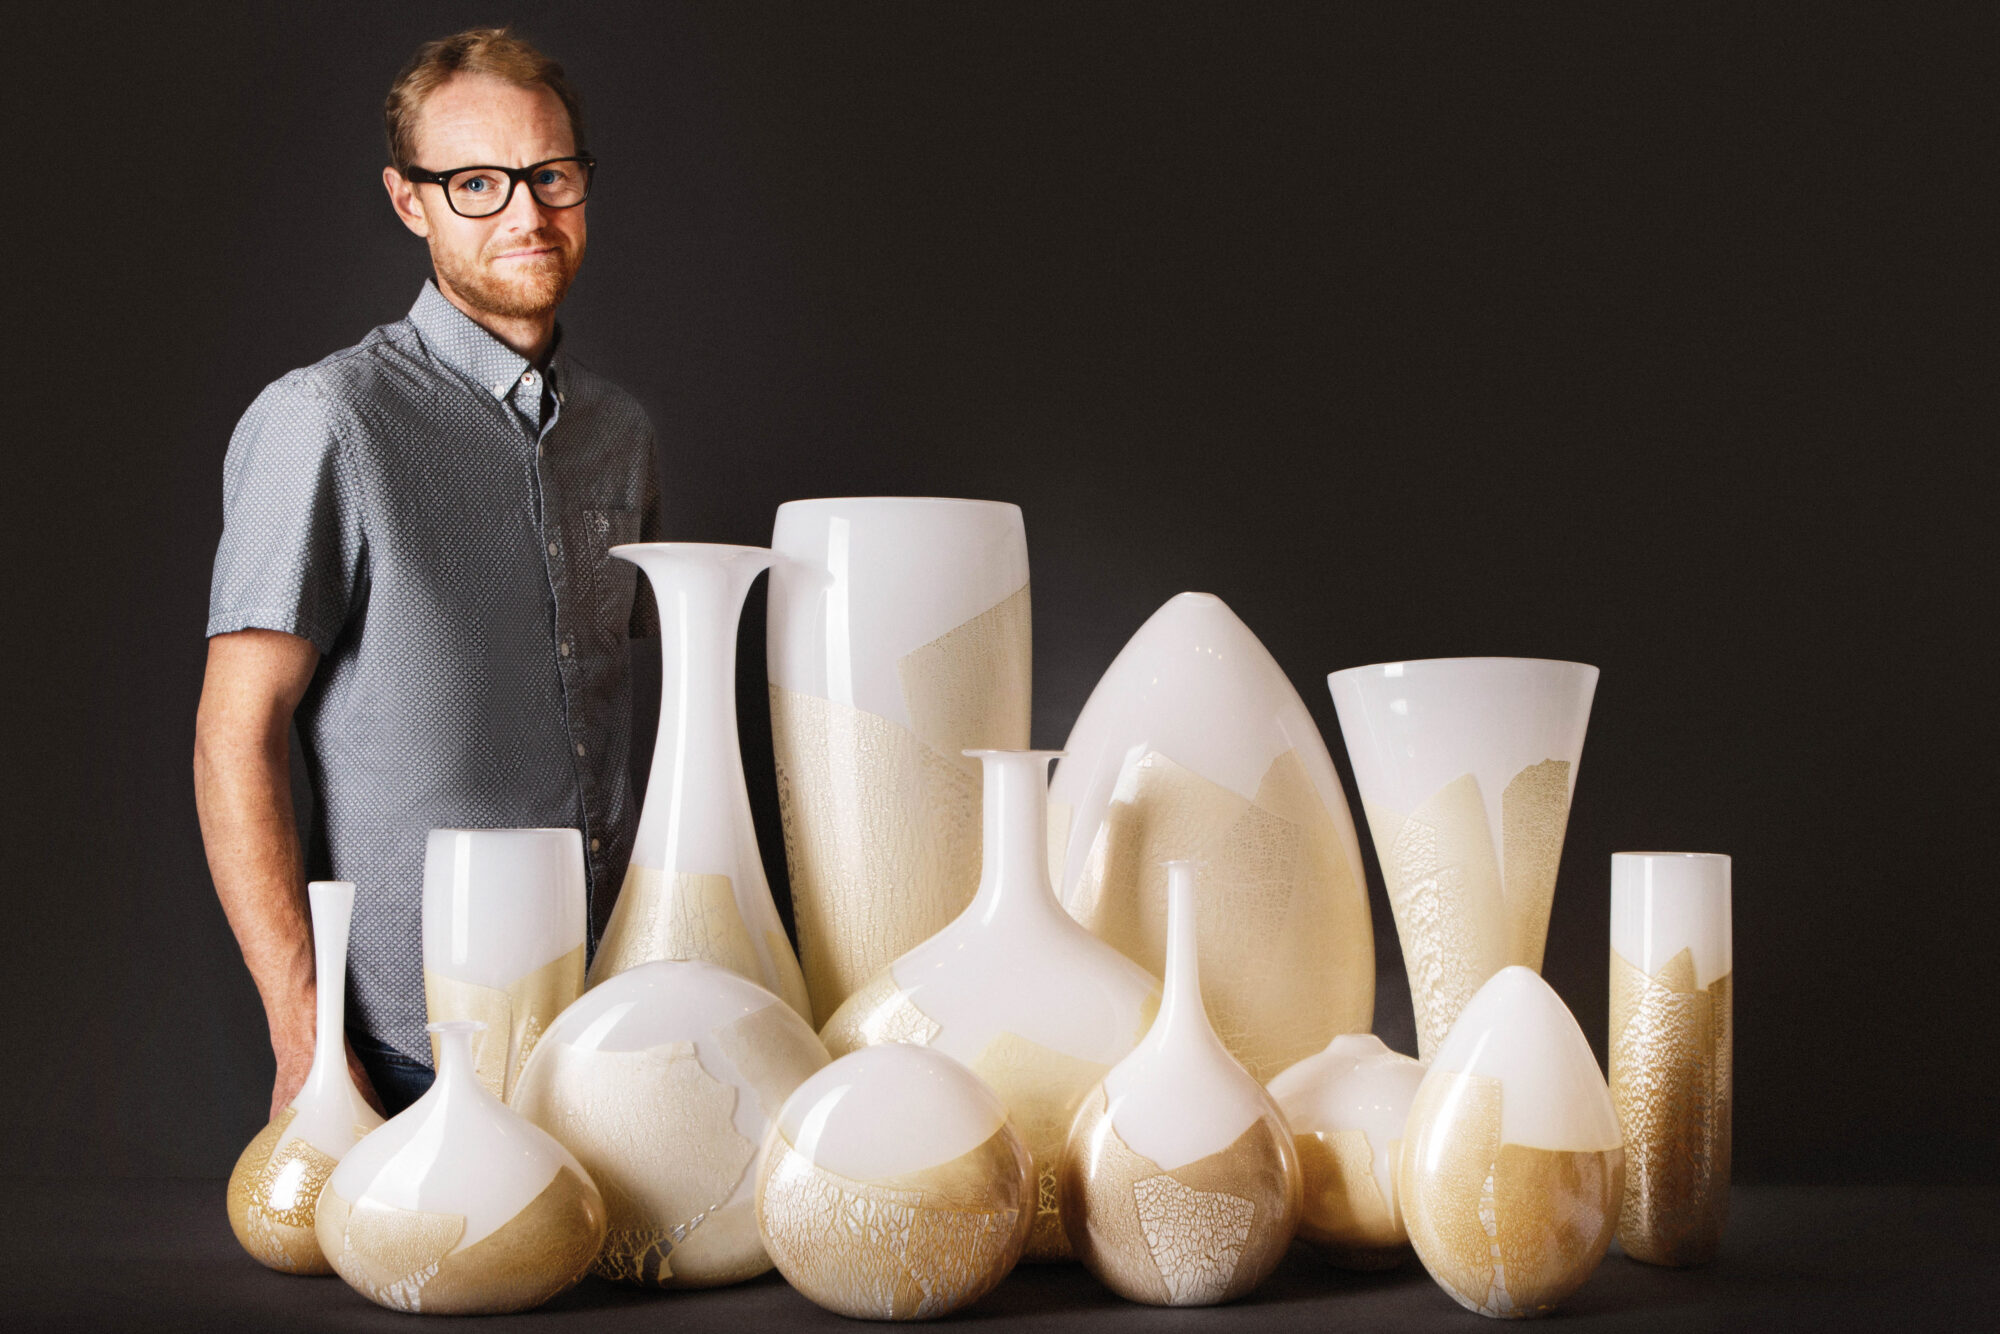 Glass artist with cream-colored vases